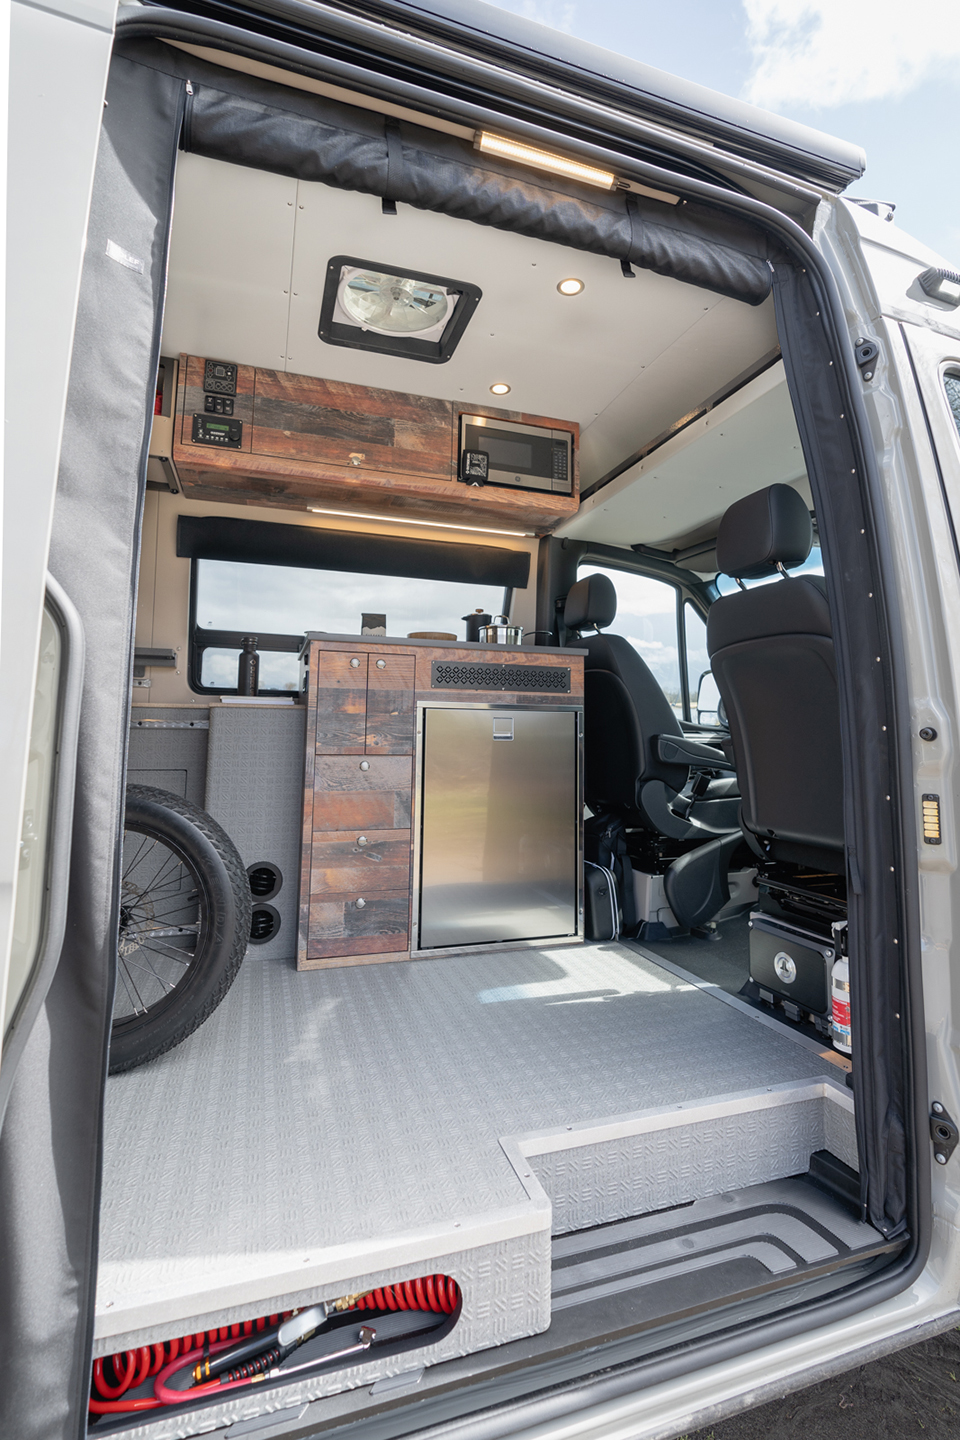 Interior of a van with an e-bike strapped down in the middle